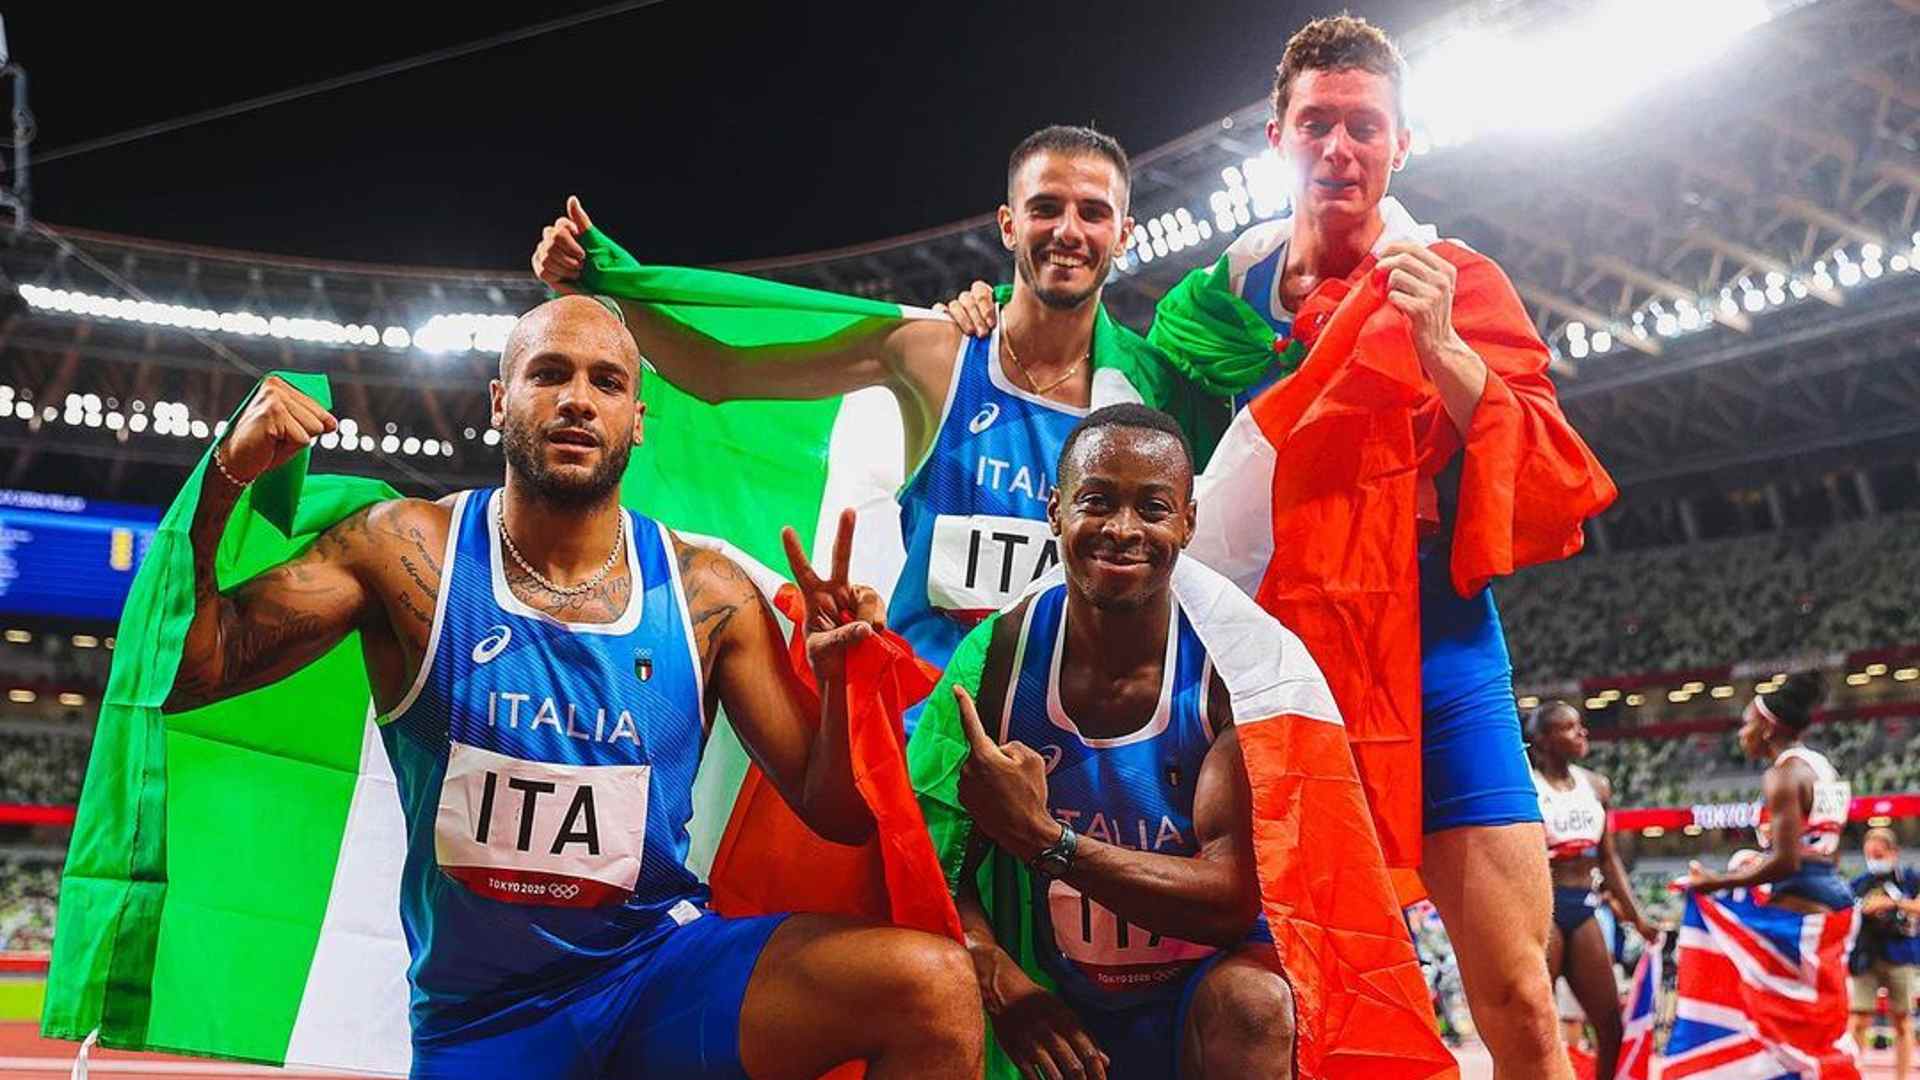 Marcell Jacobs and the Italian 4X100 m relay team after winning the gold in Tokyo 2020 (Image Credits - Instagram/@crazylongjumper)